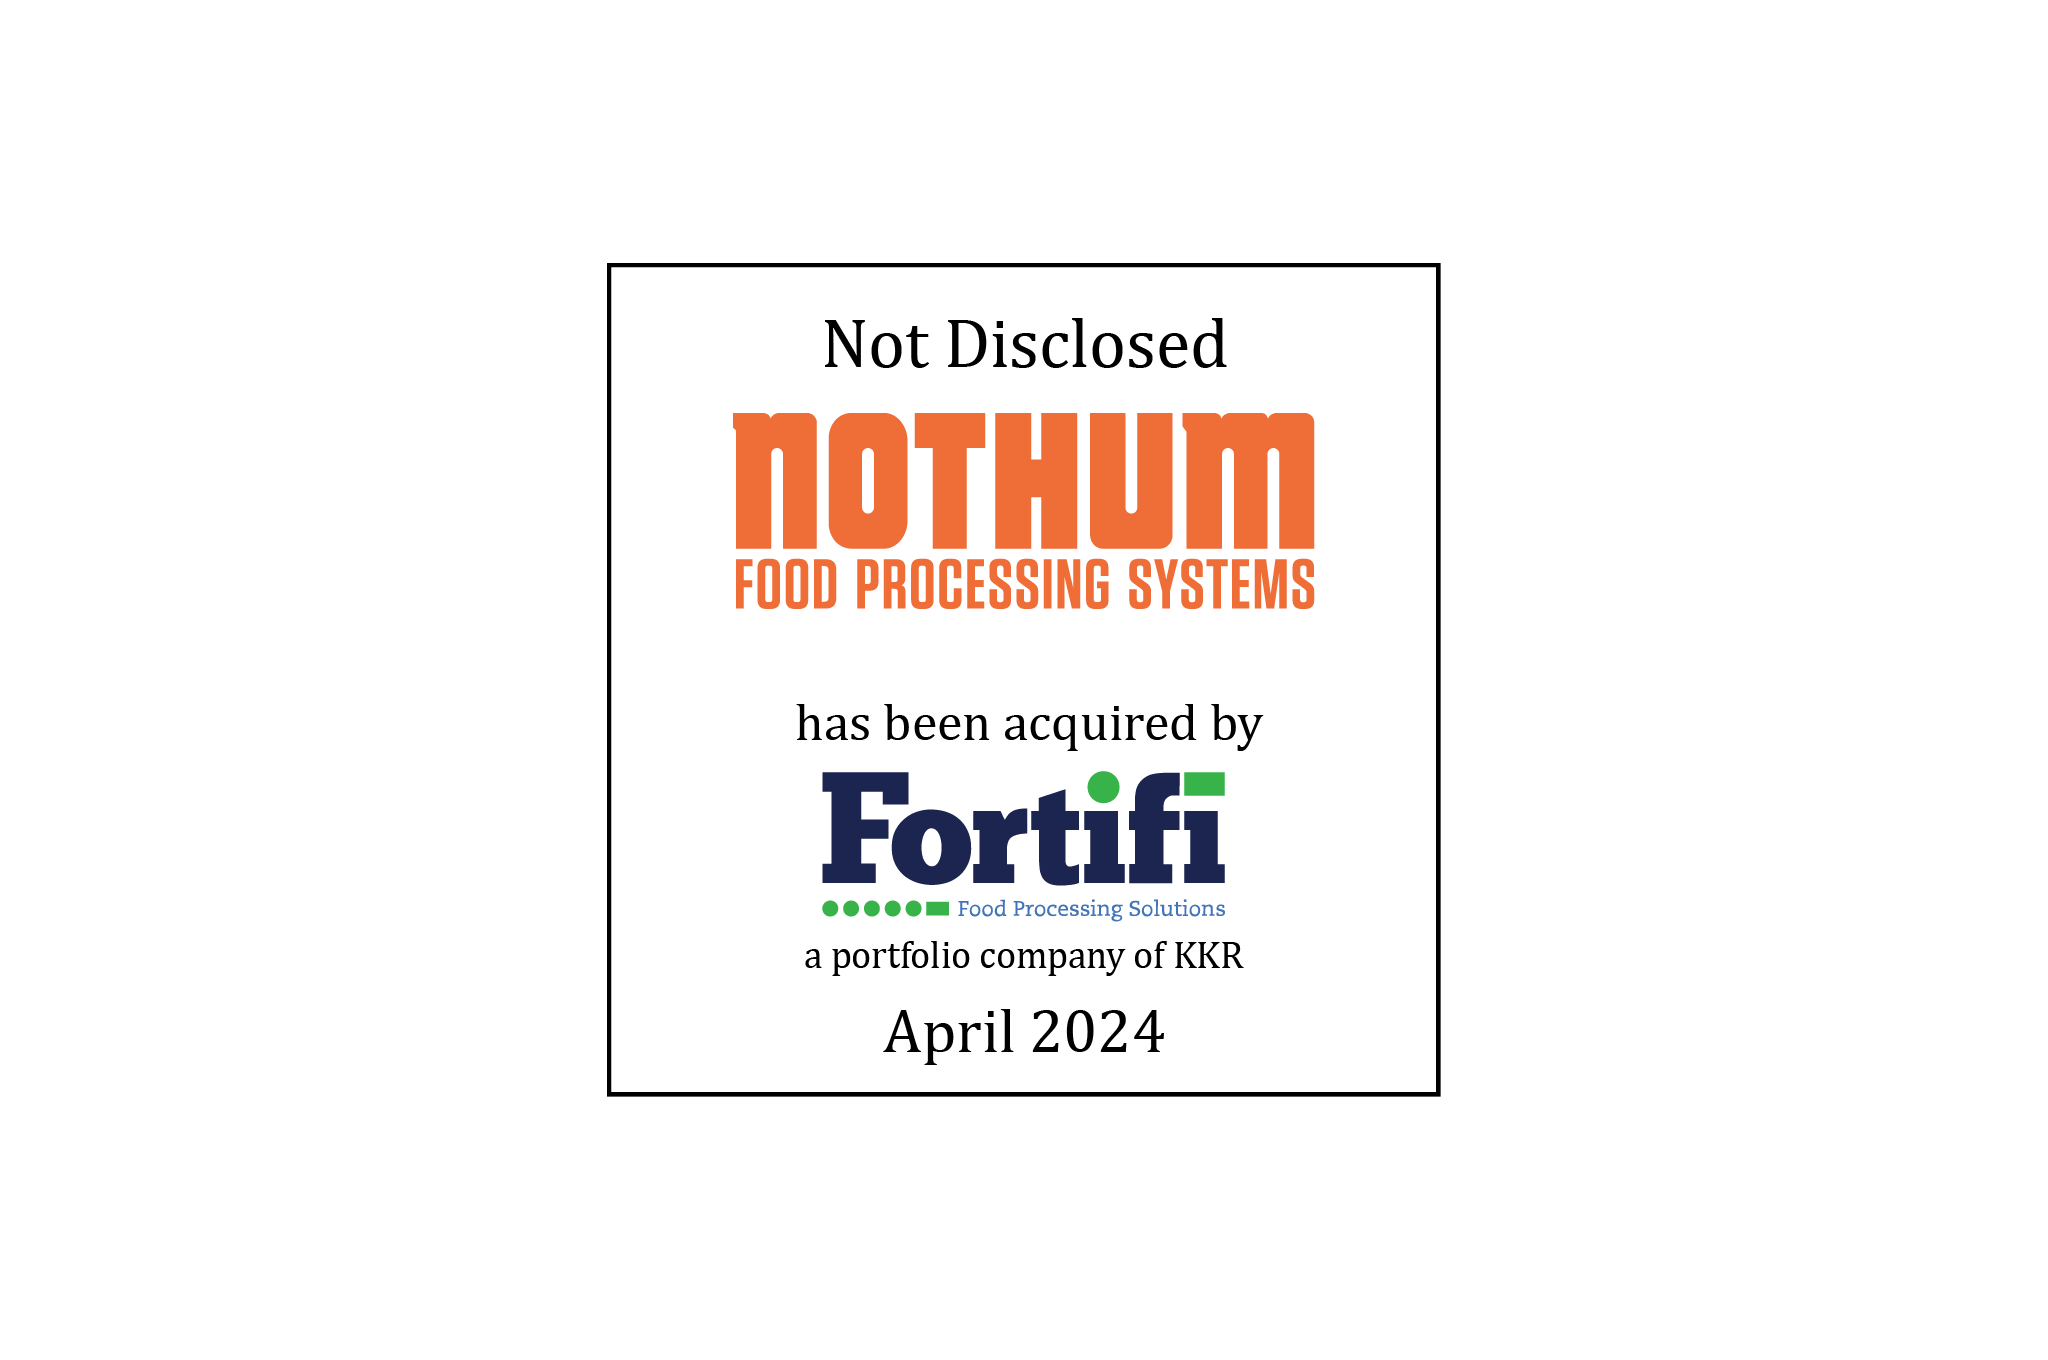 Not Disclosed | Nothum Food Processing Solutions (lgoo) has been acquired by Fortifi Food Processing Solutions (logo), a portfolio company of KKR | April 2024 